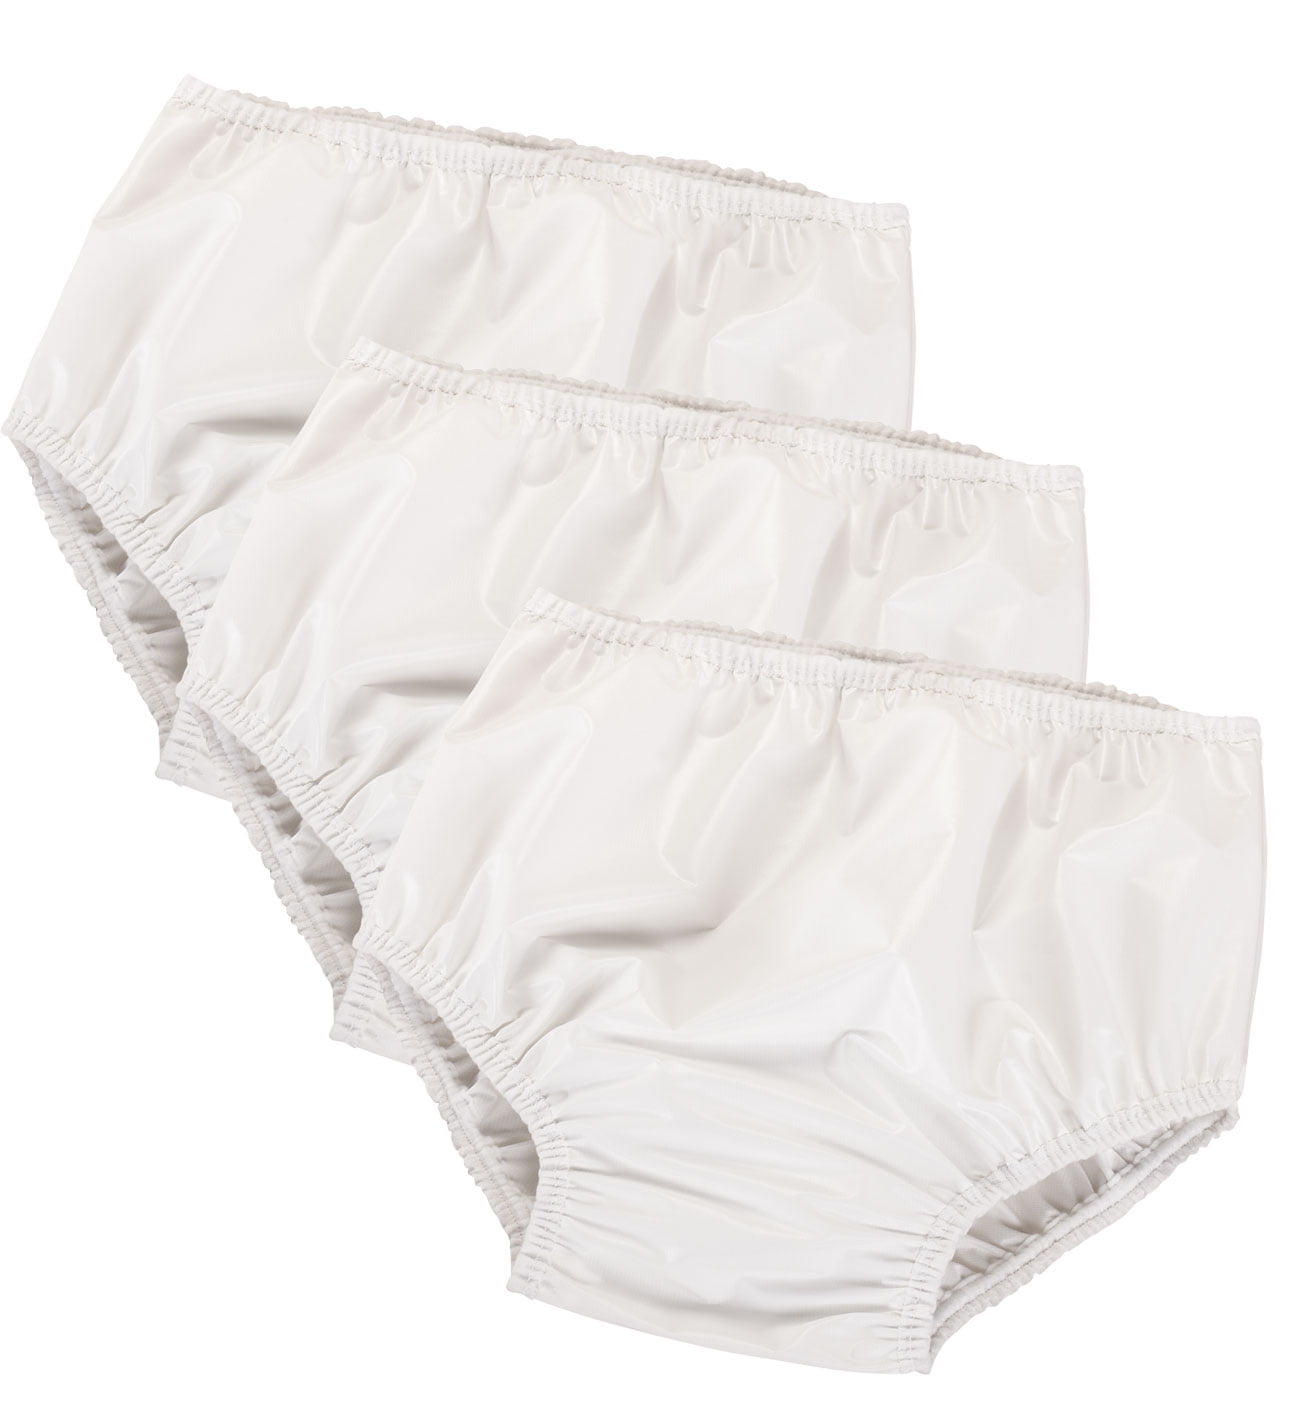 Incontinent, Autistic Plastic Pants in Adult Sizes, MILKY WHITE LONG WAIST